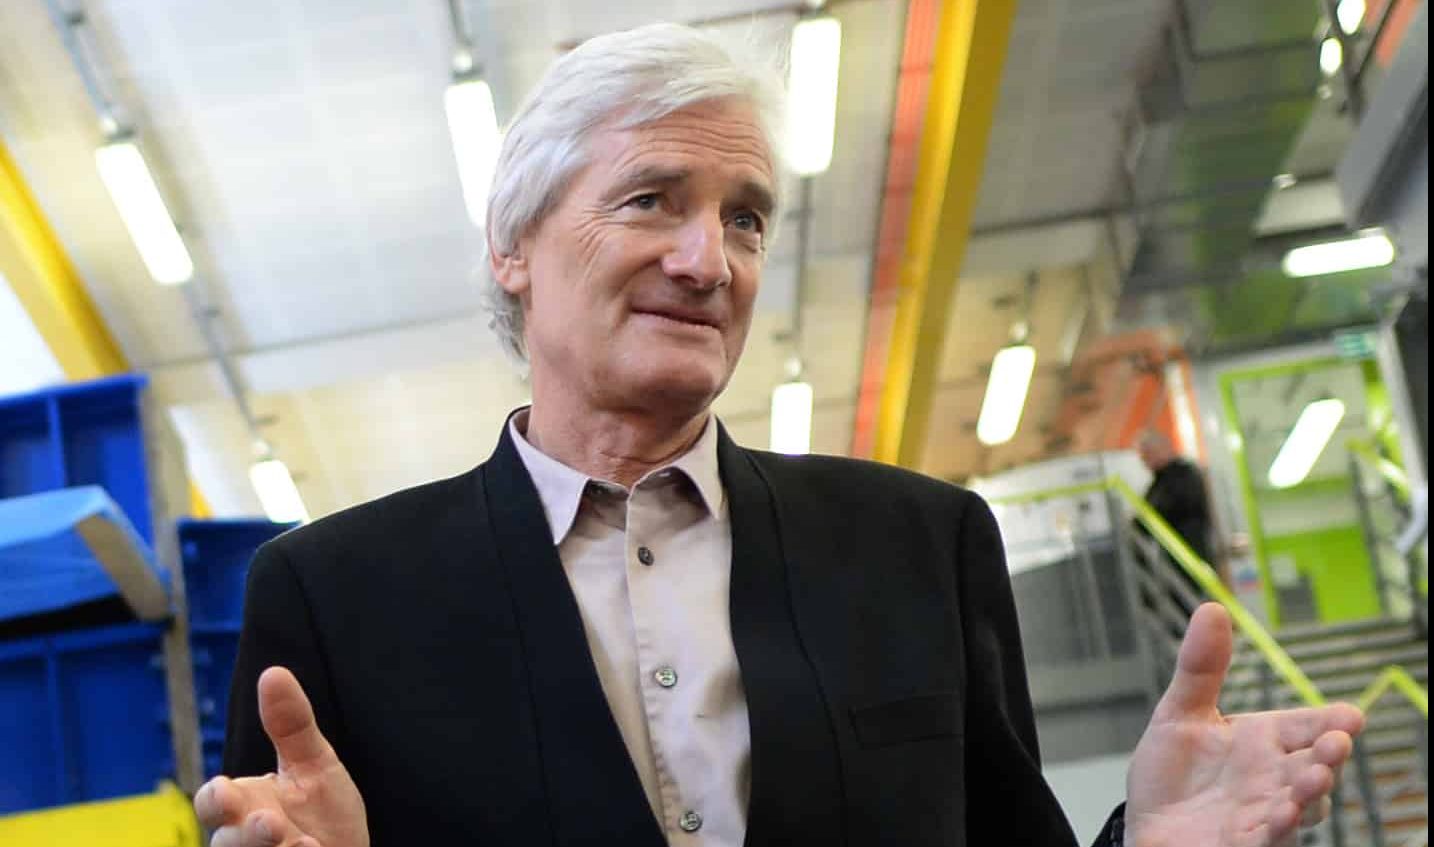 Sir James Dyson urges Brits to be ‘patient’ with Brexit benefits